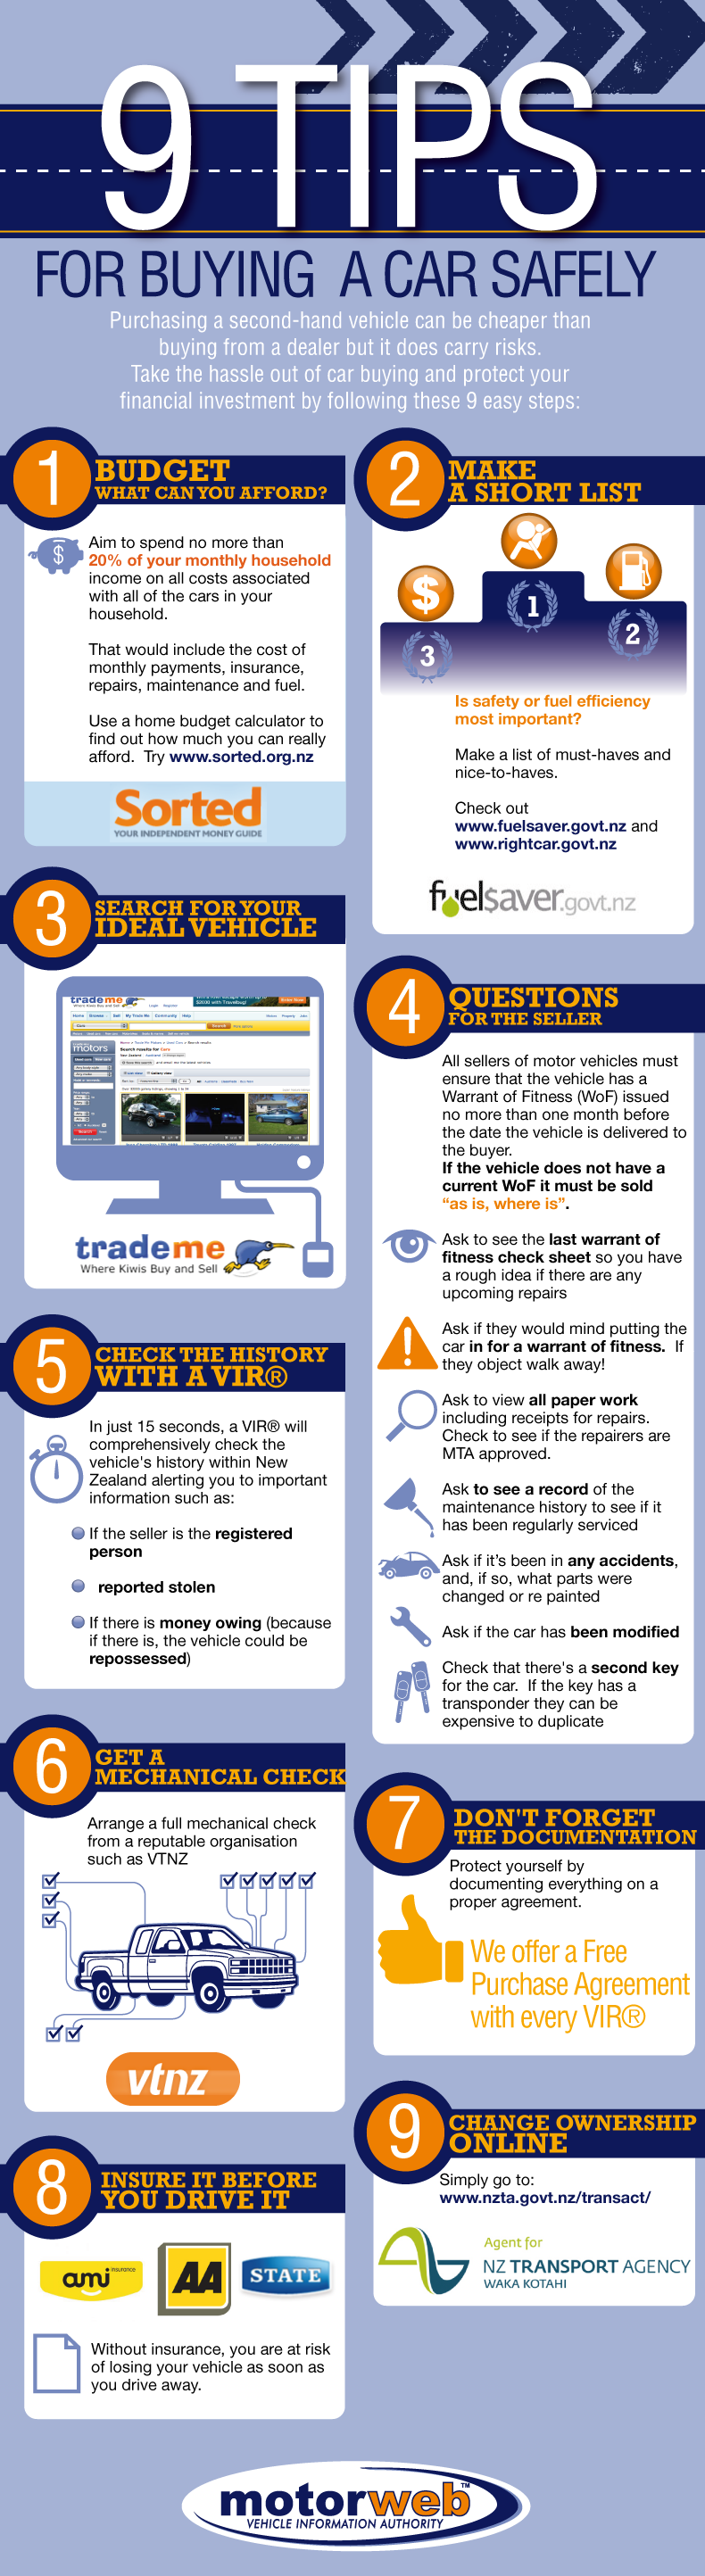 9 Tips For Buy A Car Safely Motorweb™ Nz